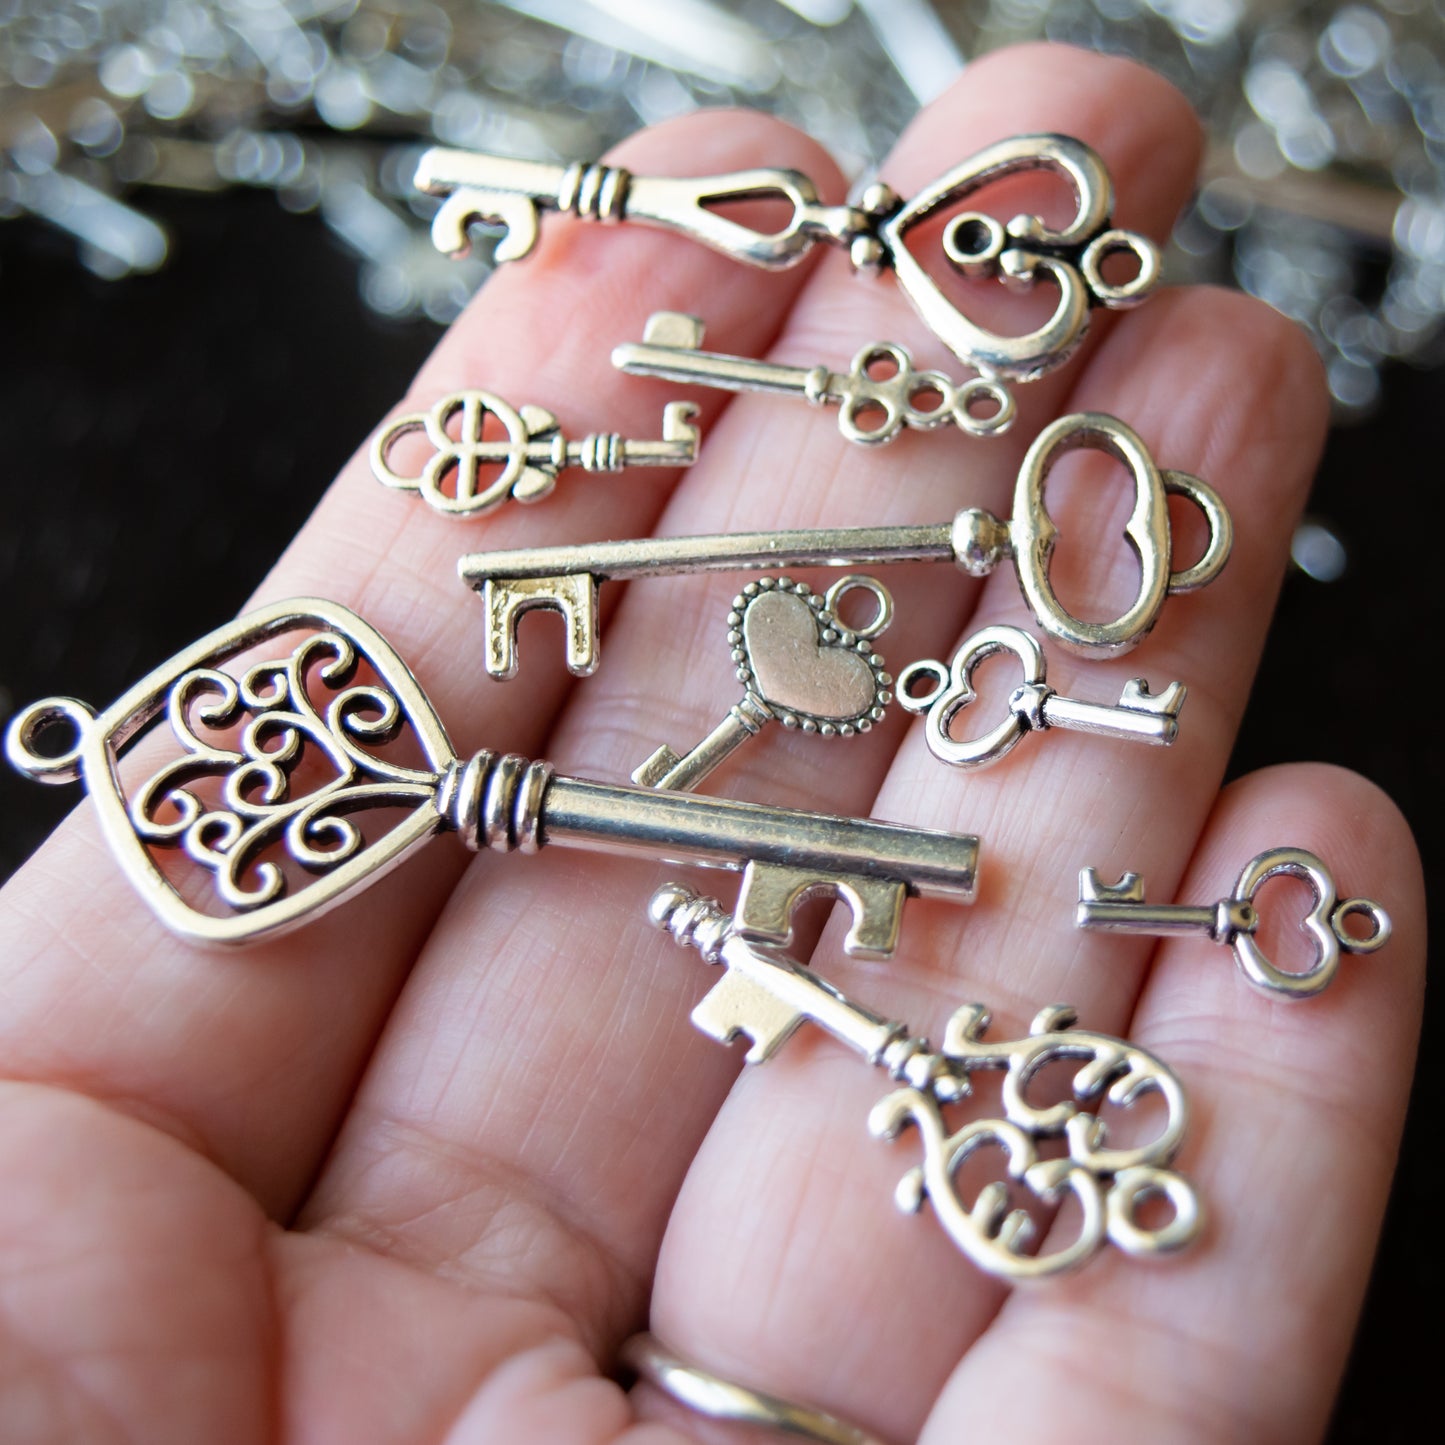 Assorted Key Charms and Pendants in Antiqued Silver Finish